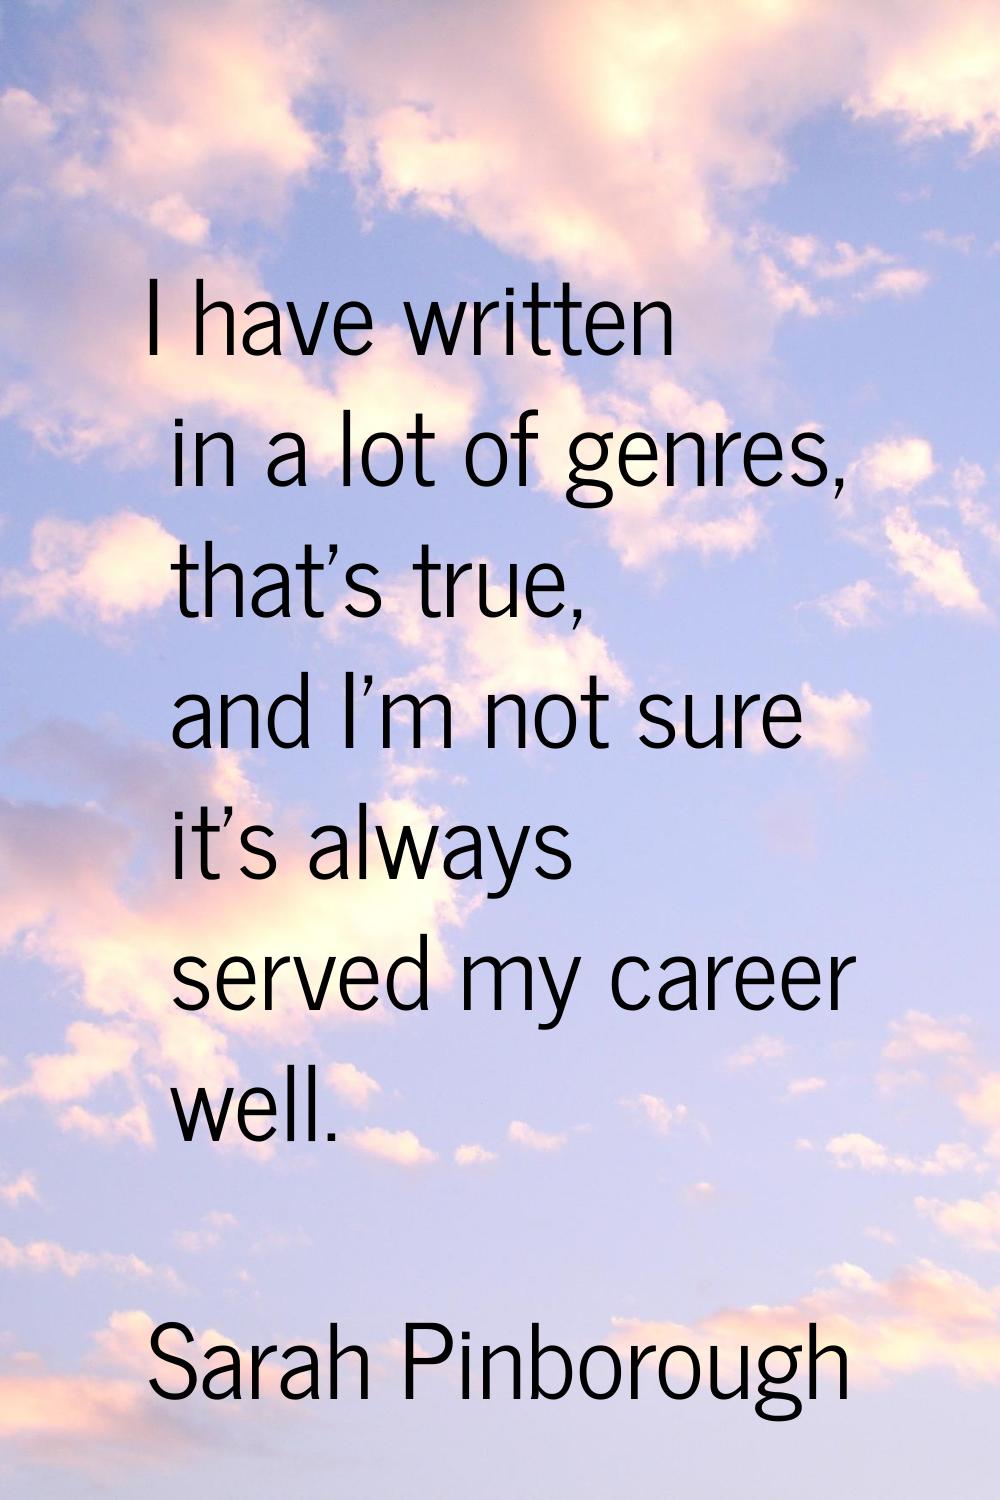 I have written in a lot of genres, that's true, and I'm not sure it's always served my career well.